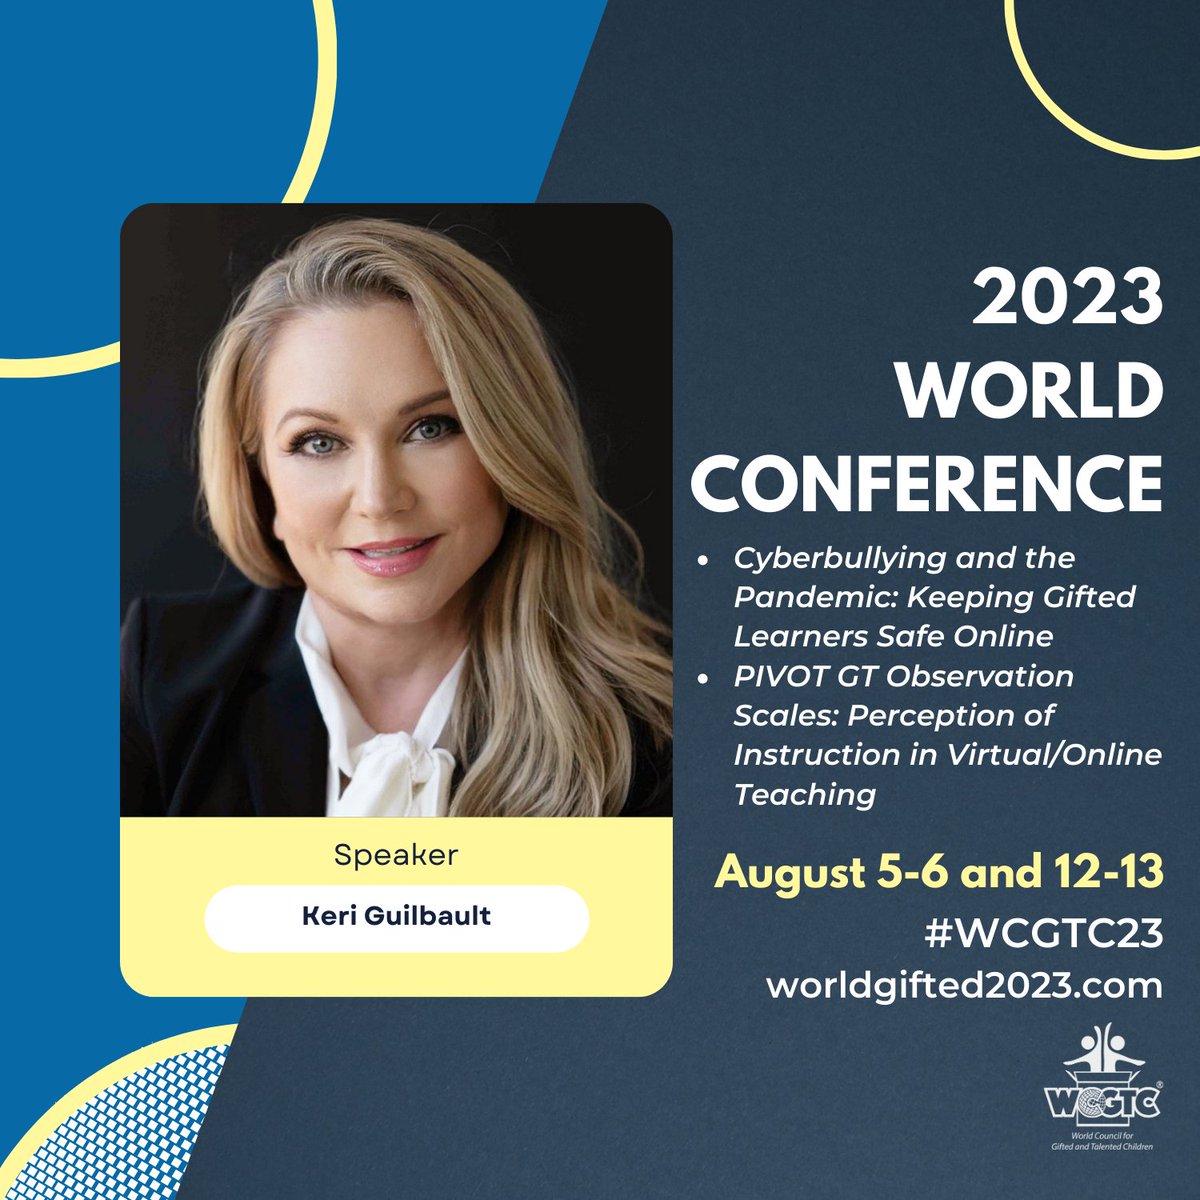 Speaker Spotlight: Keri Guilbault will share two presentations at the World Conference. Learn more at worldgifted2023.com #WCGTC23 #gtchat #edchat #gifted #giftededucation #talentdevelopment #creativity